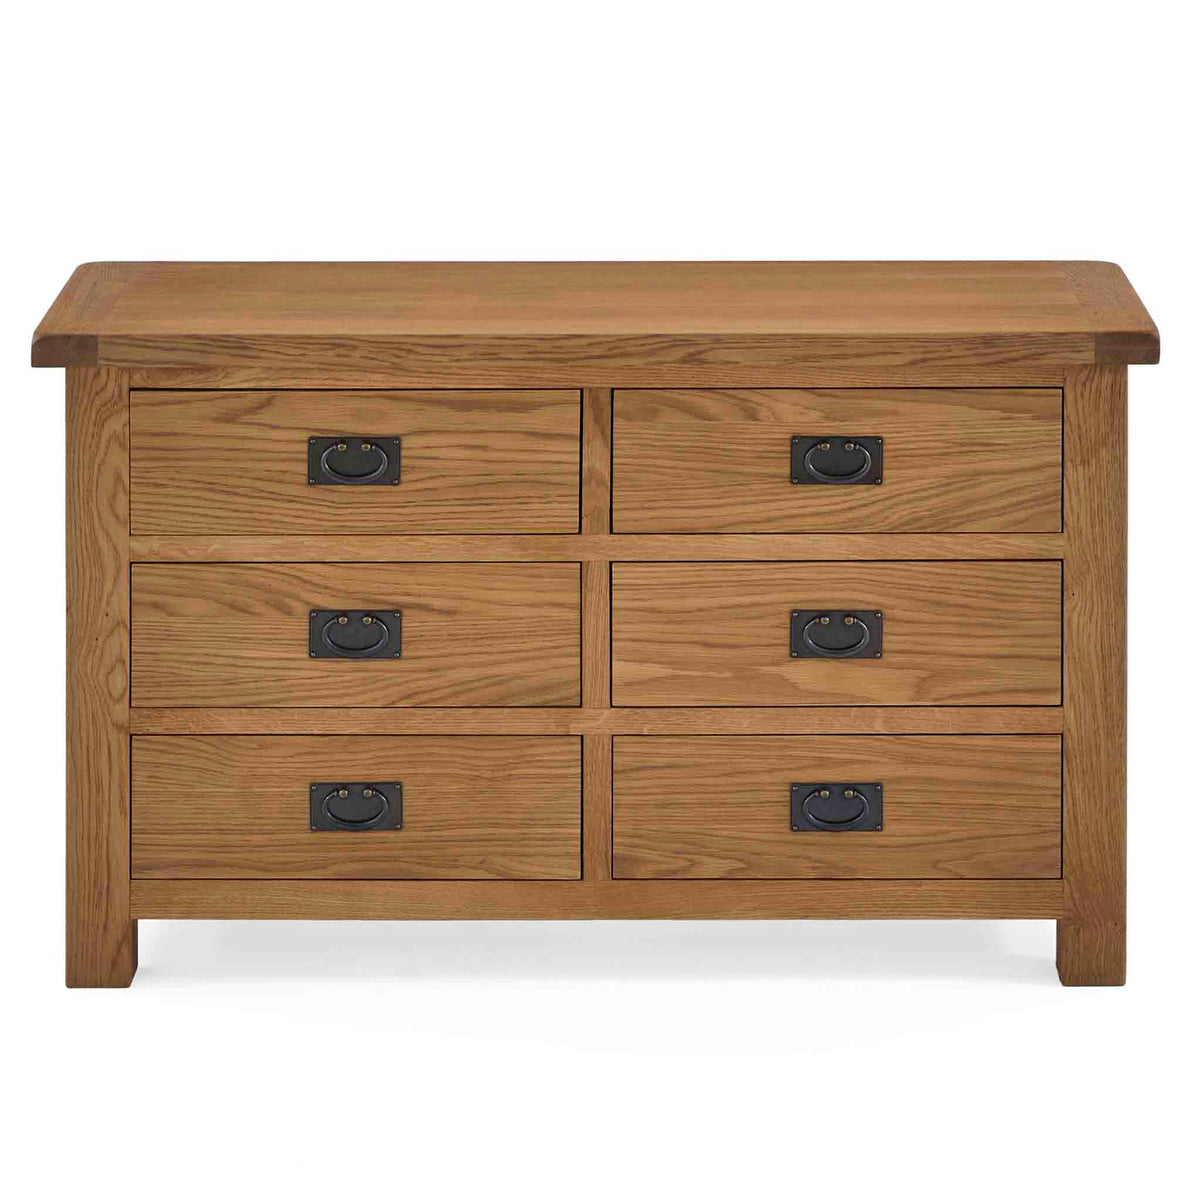 Zelah Oak 3+3 Drawer Chest of Drawers - Front view showing top